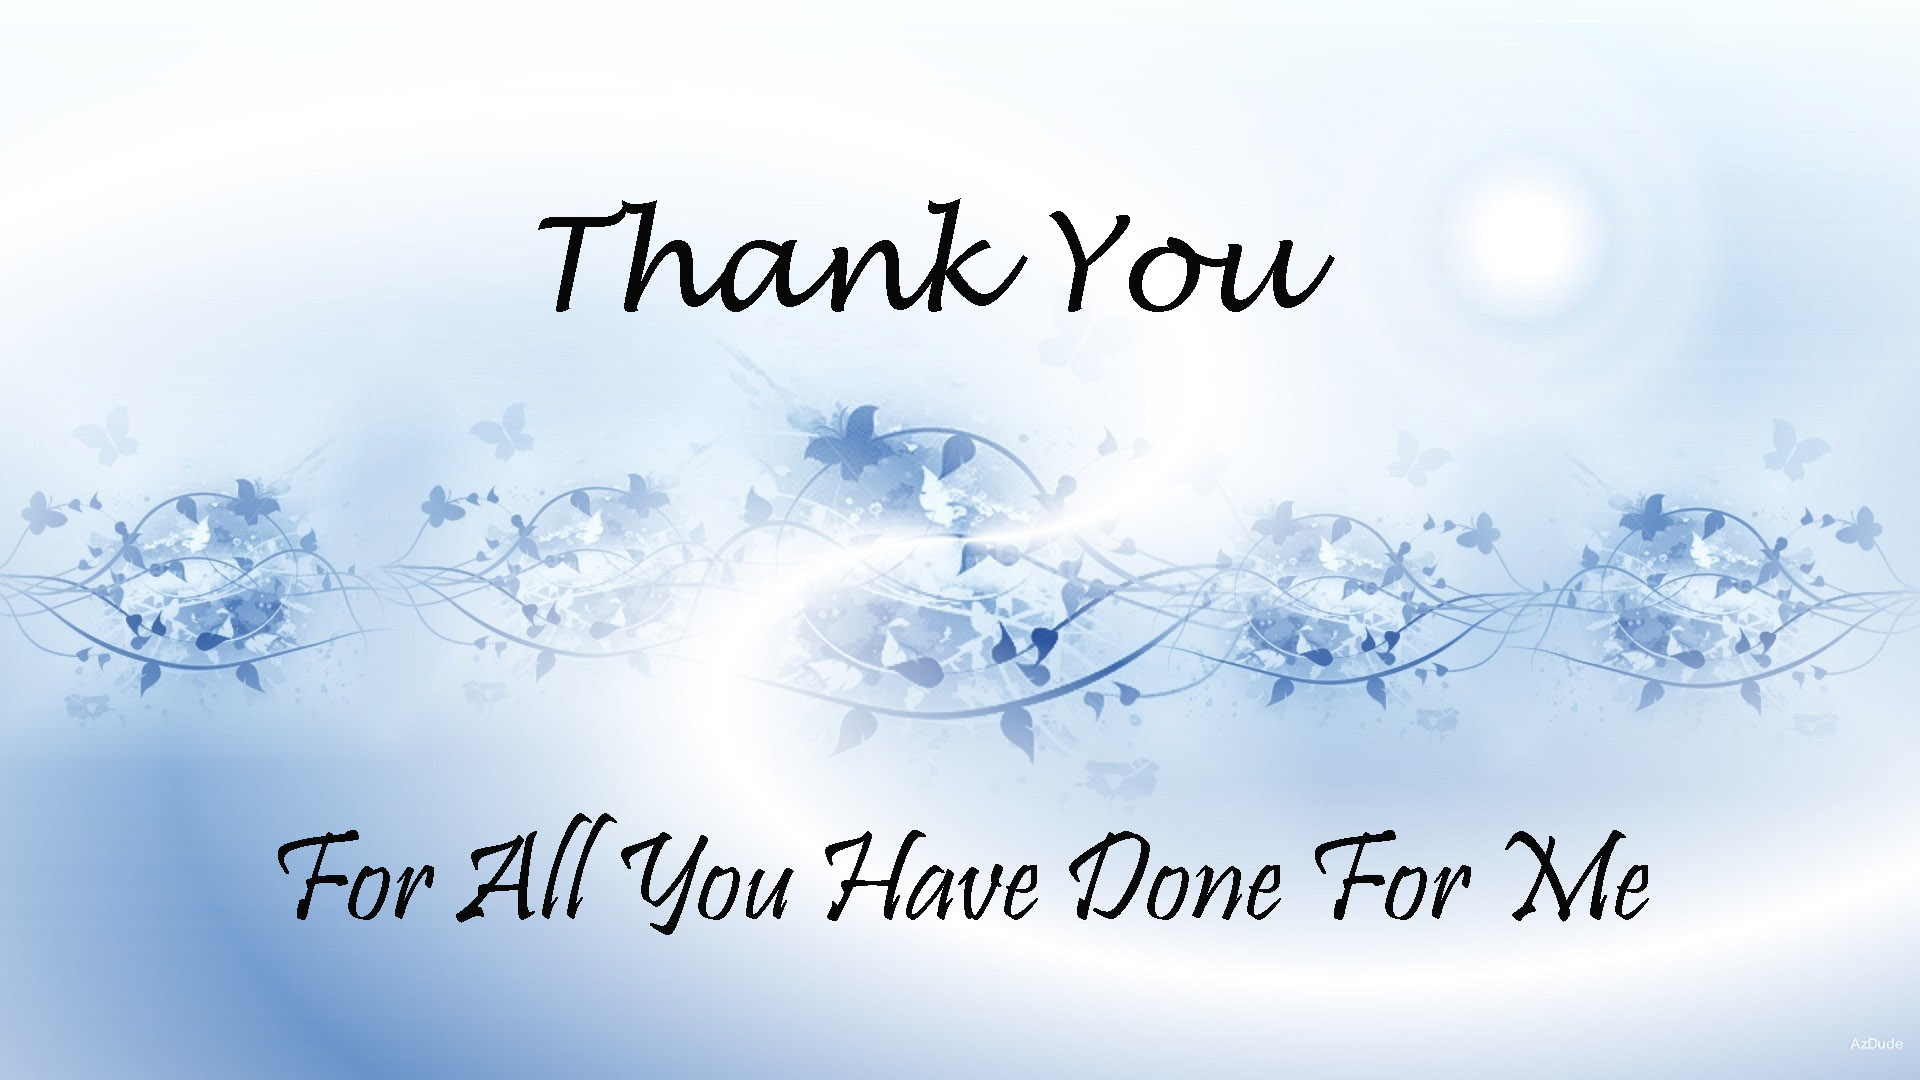 thankyou-card-images-hd-wallpapers-2018